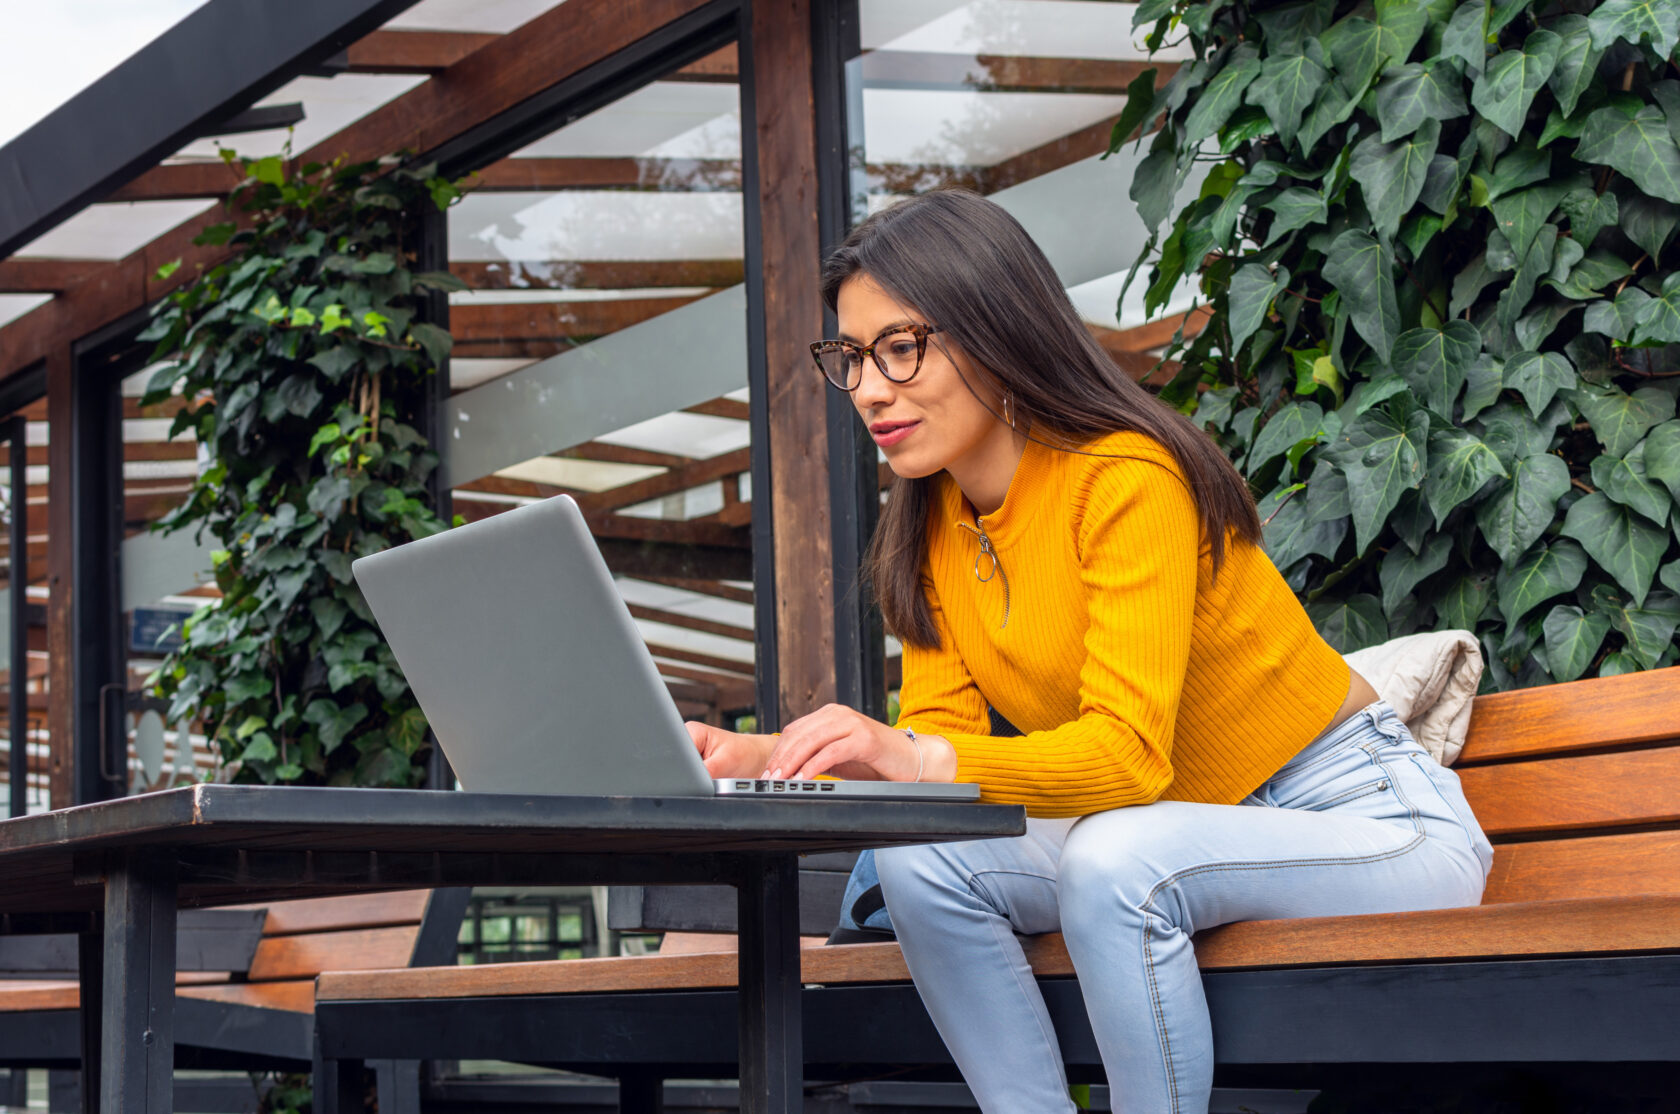 Young, Hispanic woman with indigenous features wearing a yellow sweater sitting on a bench outside while using her laptop